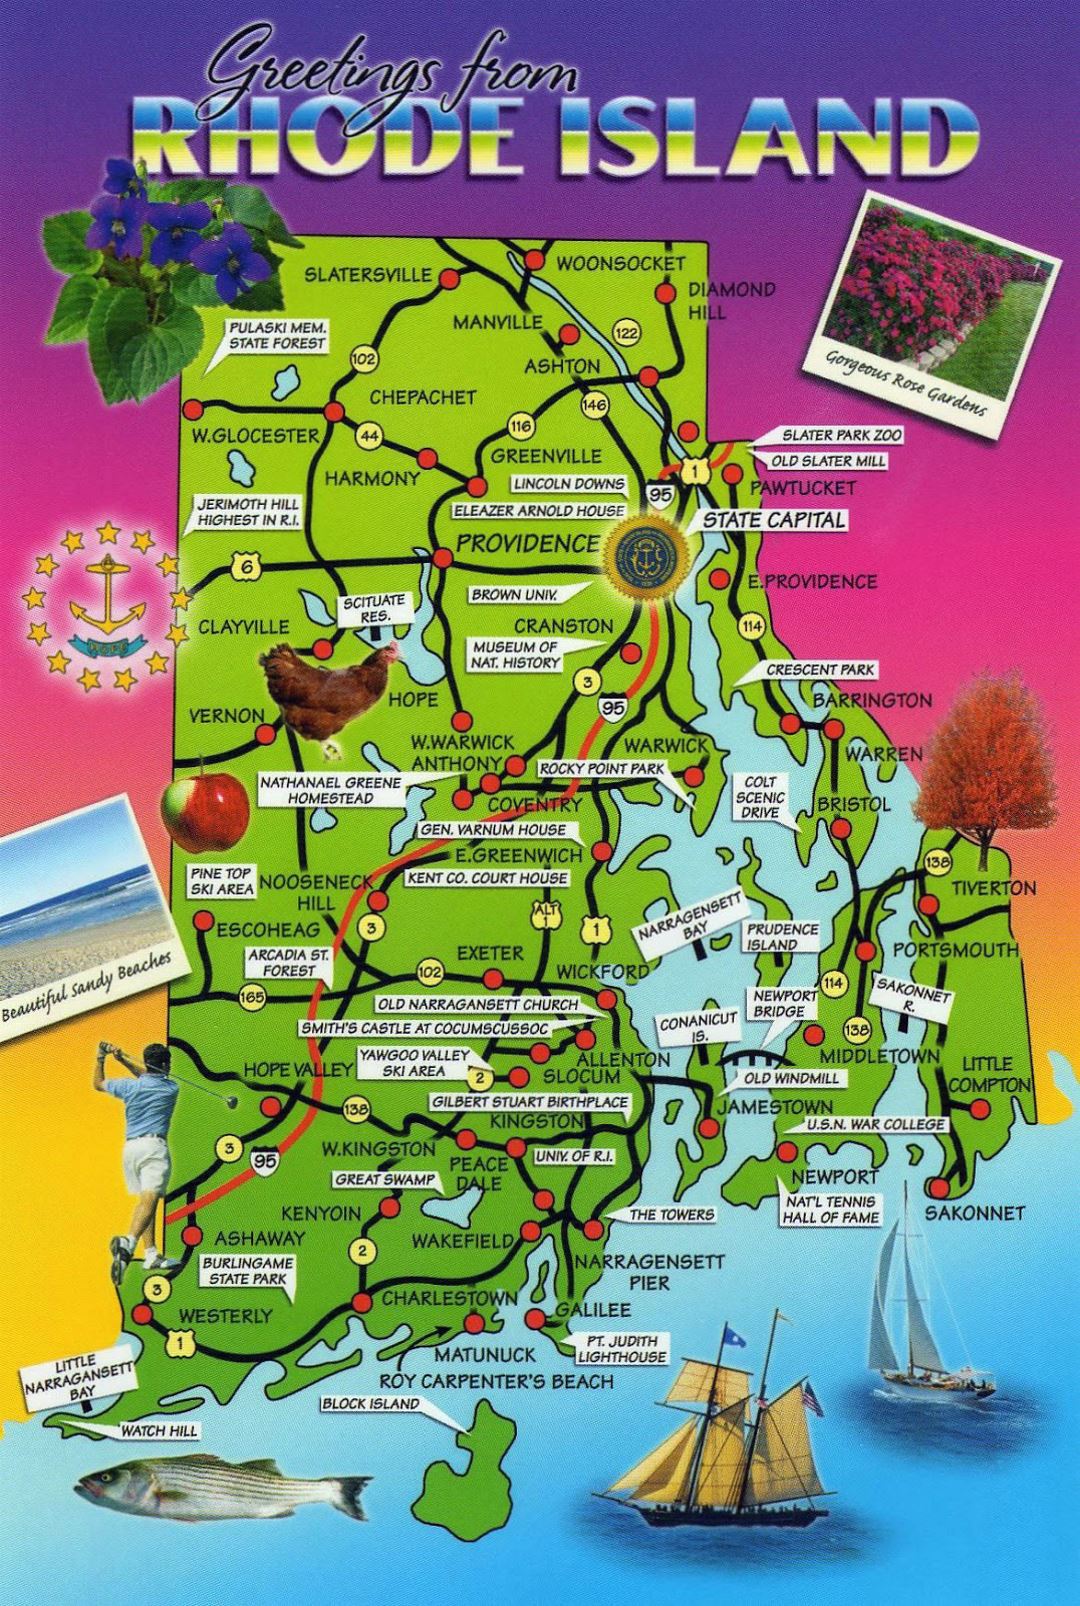 Large tourist map of Rhode Island state